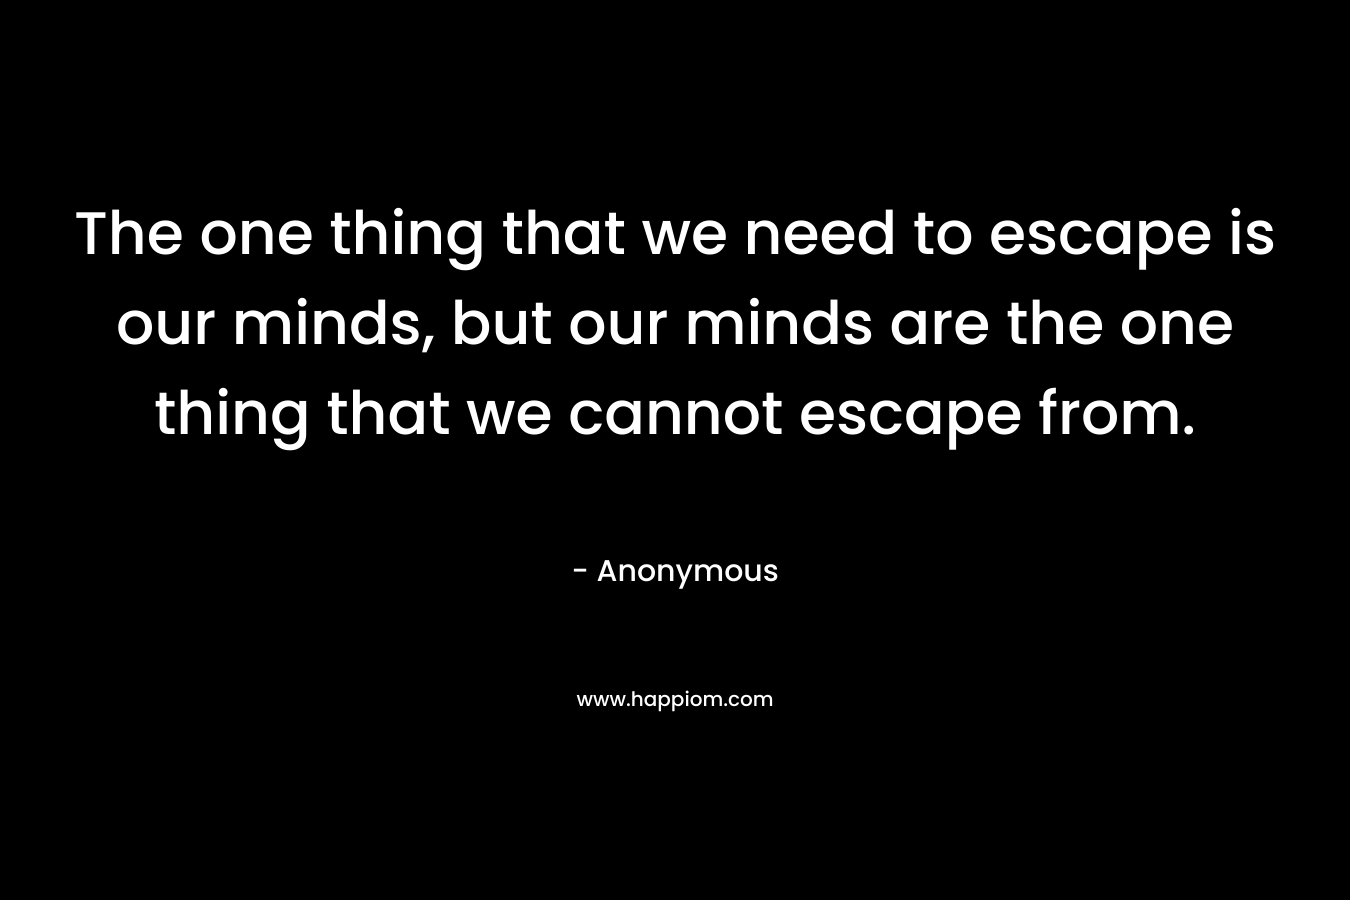 The one thing that we need to escape is our minds, but our minds are the one thing that we cannot escape from.